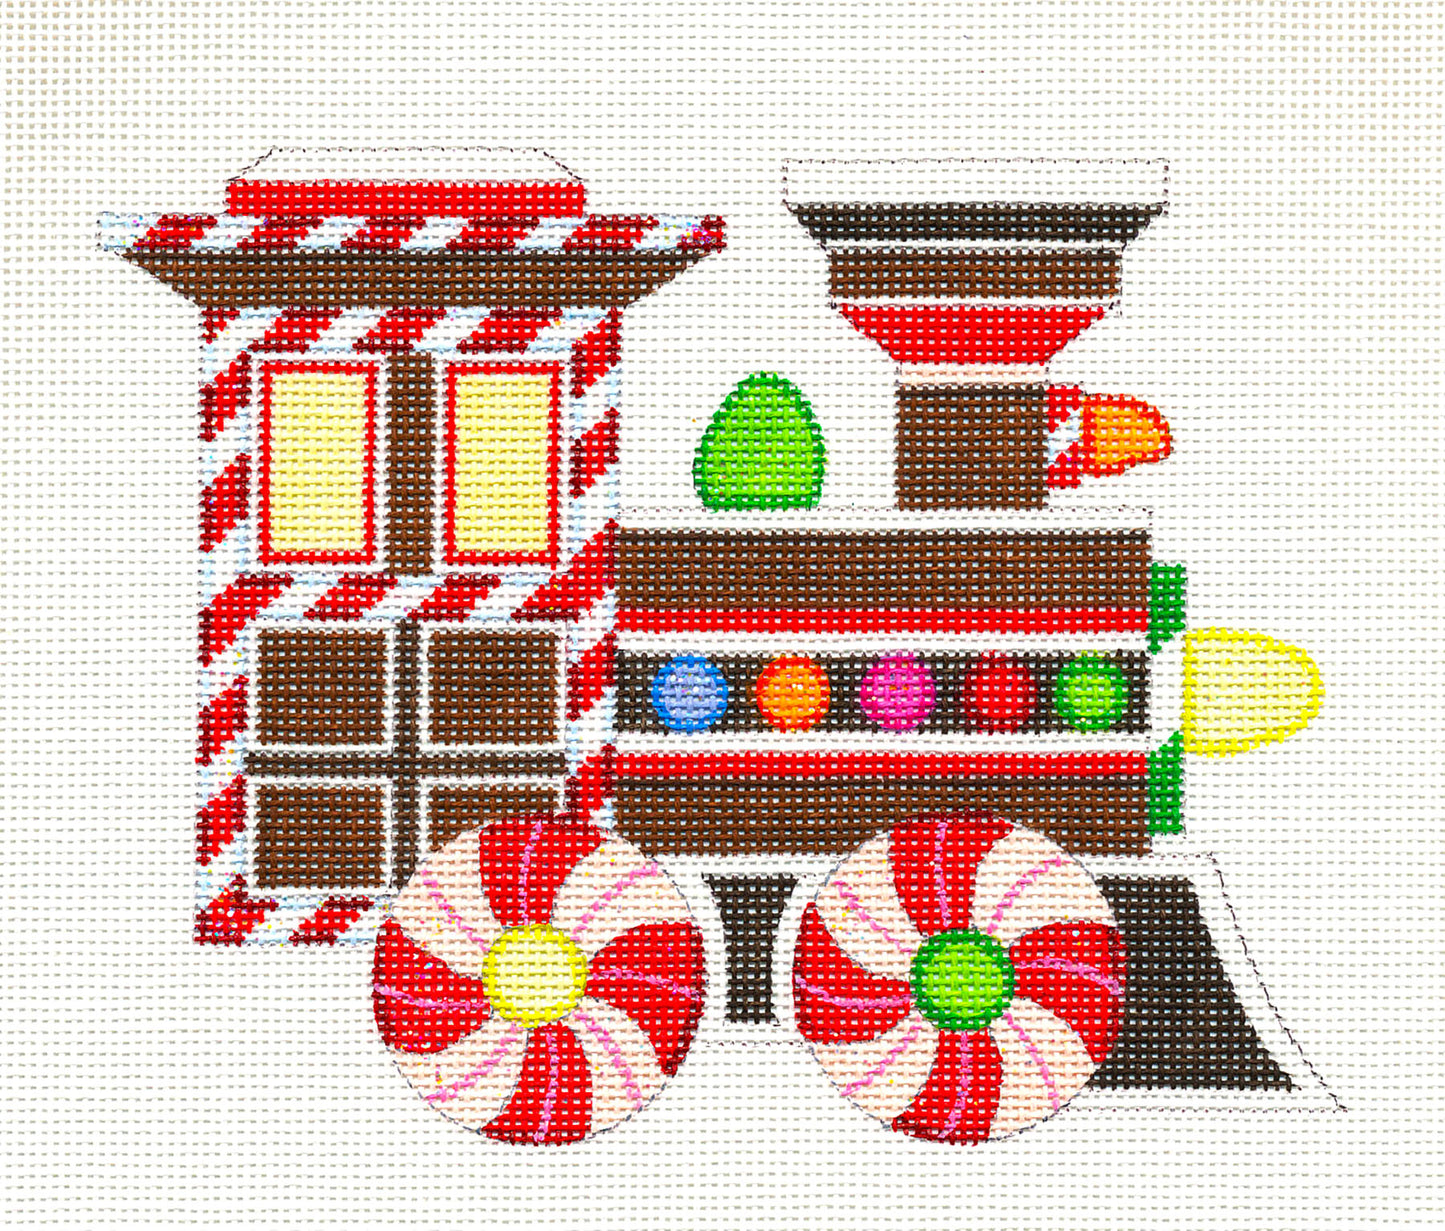 Gingerbread Train ~ Holiday TRAIN ENGINE handpainted 18 mesh Needlepoint Canvas by Raymond Crawford